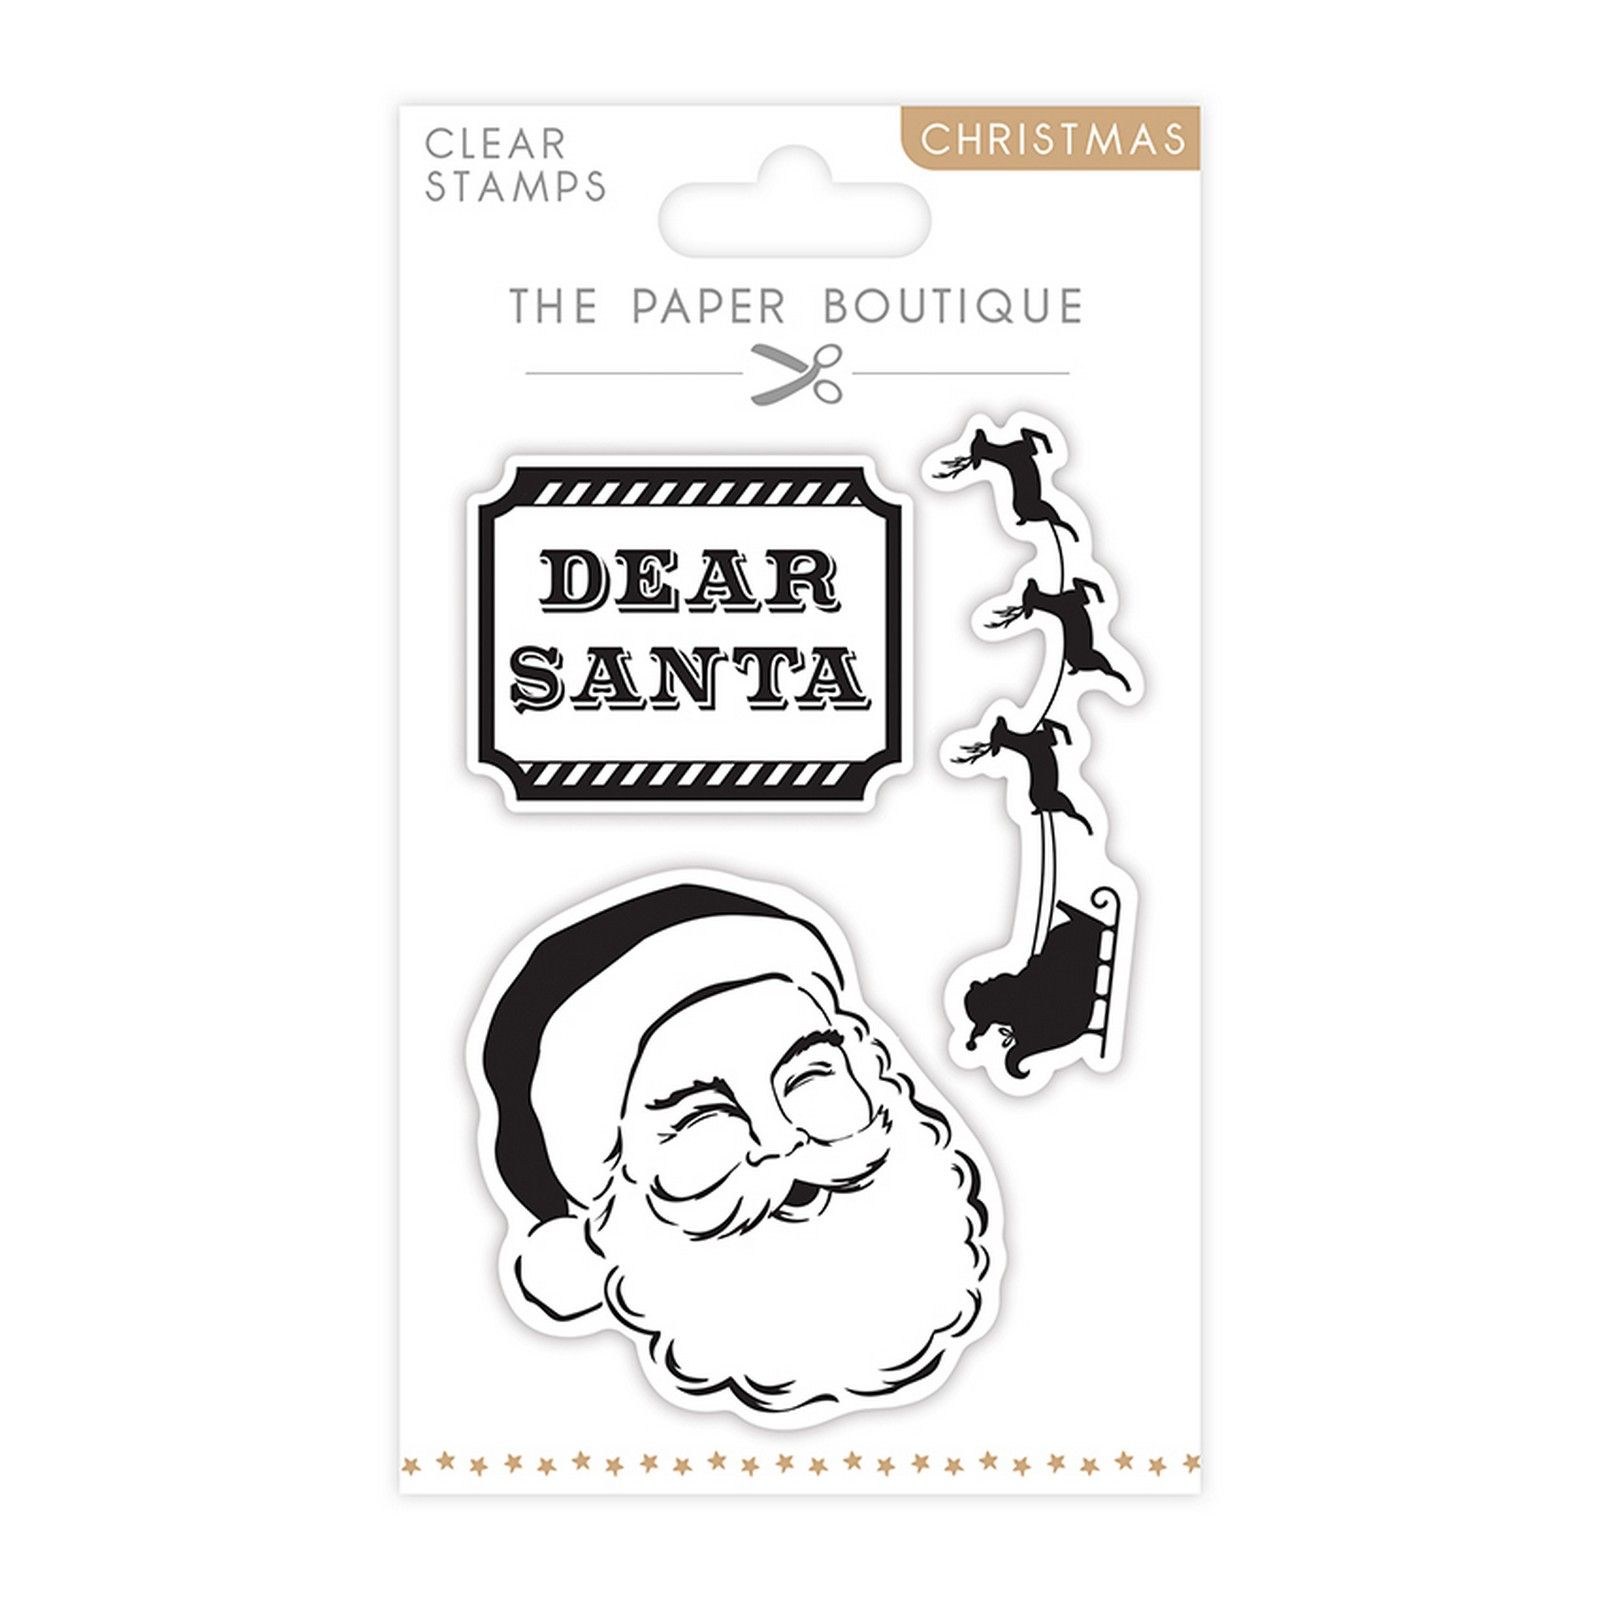 The Paper Boutique • Christmas clear stamps Santa Claus